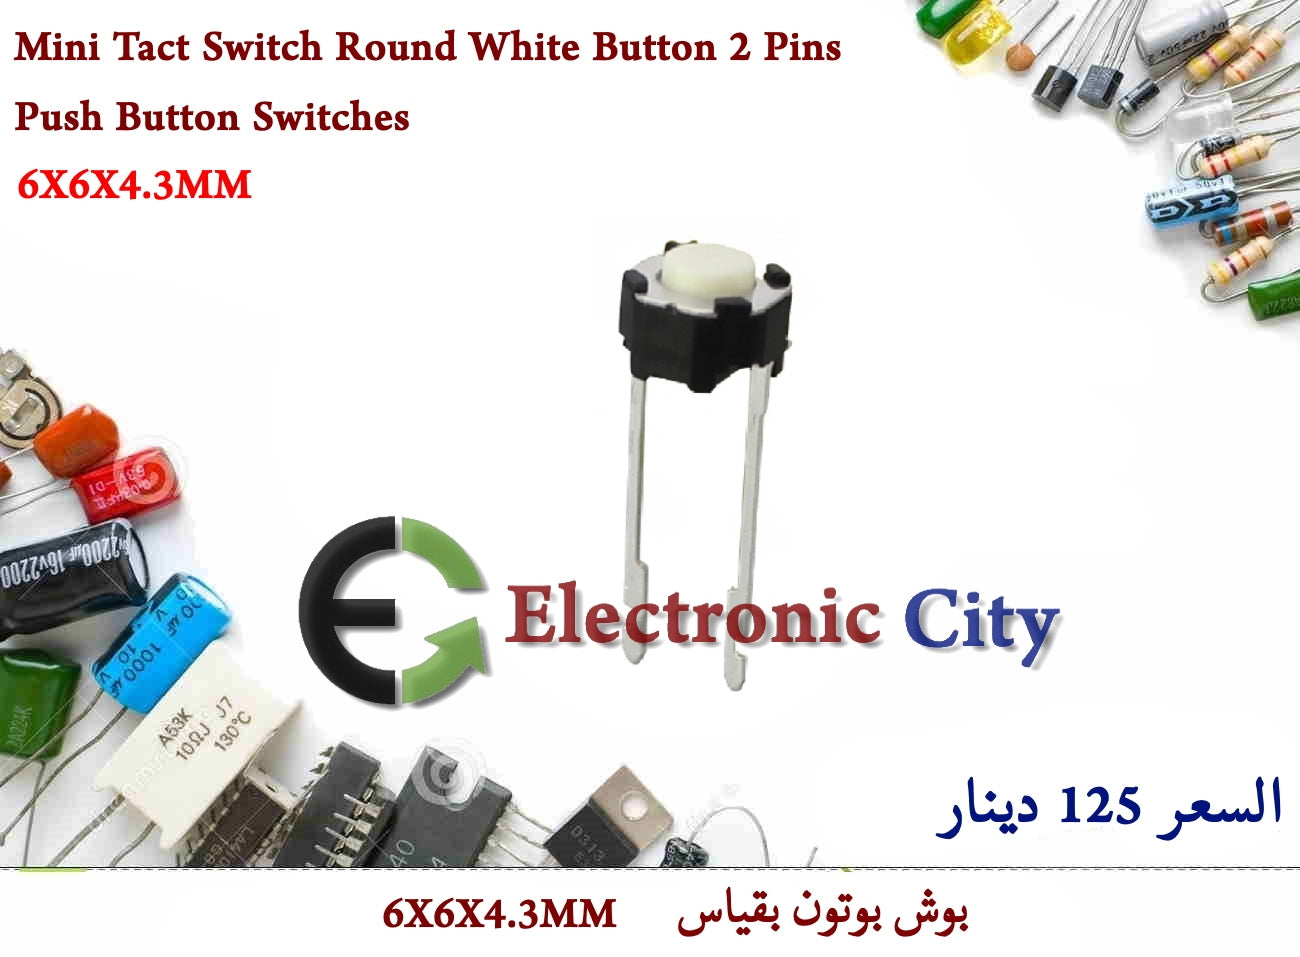 Mini Tact Switch Round White Button 2 Pins Push Button Switches 6X6X4.3MM